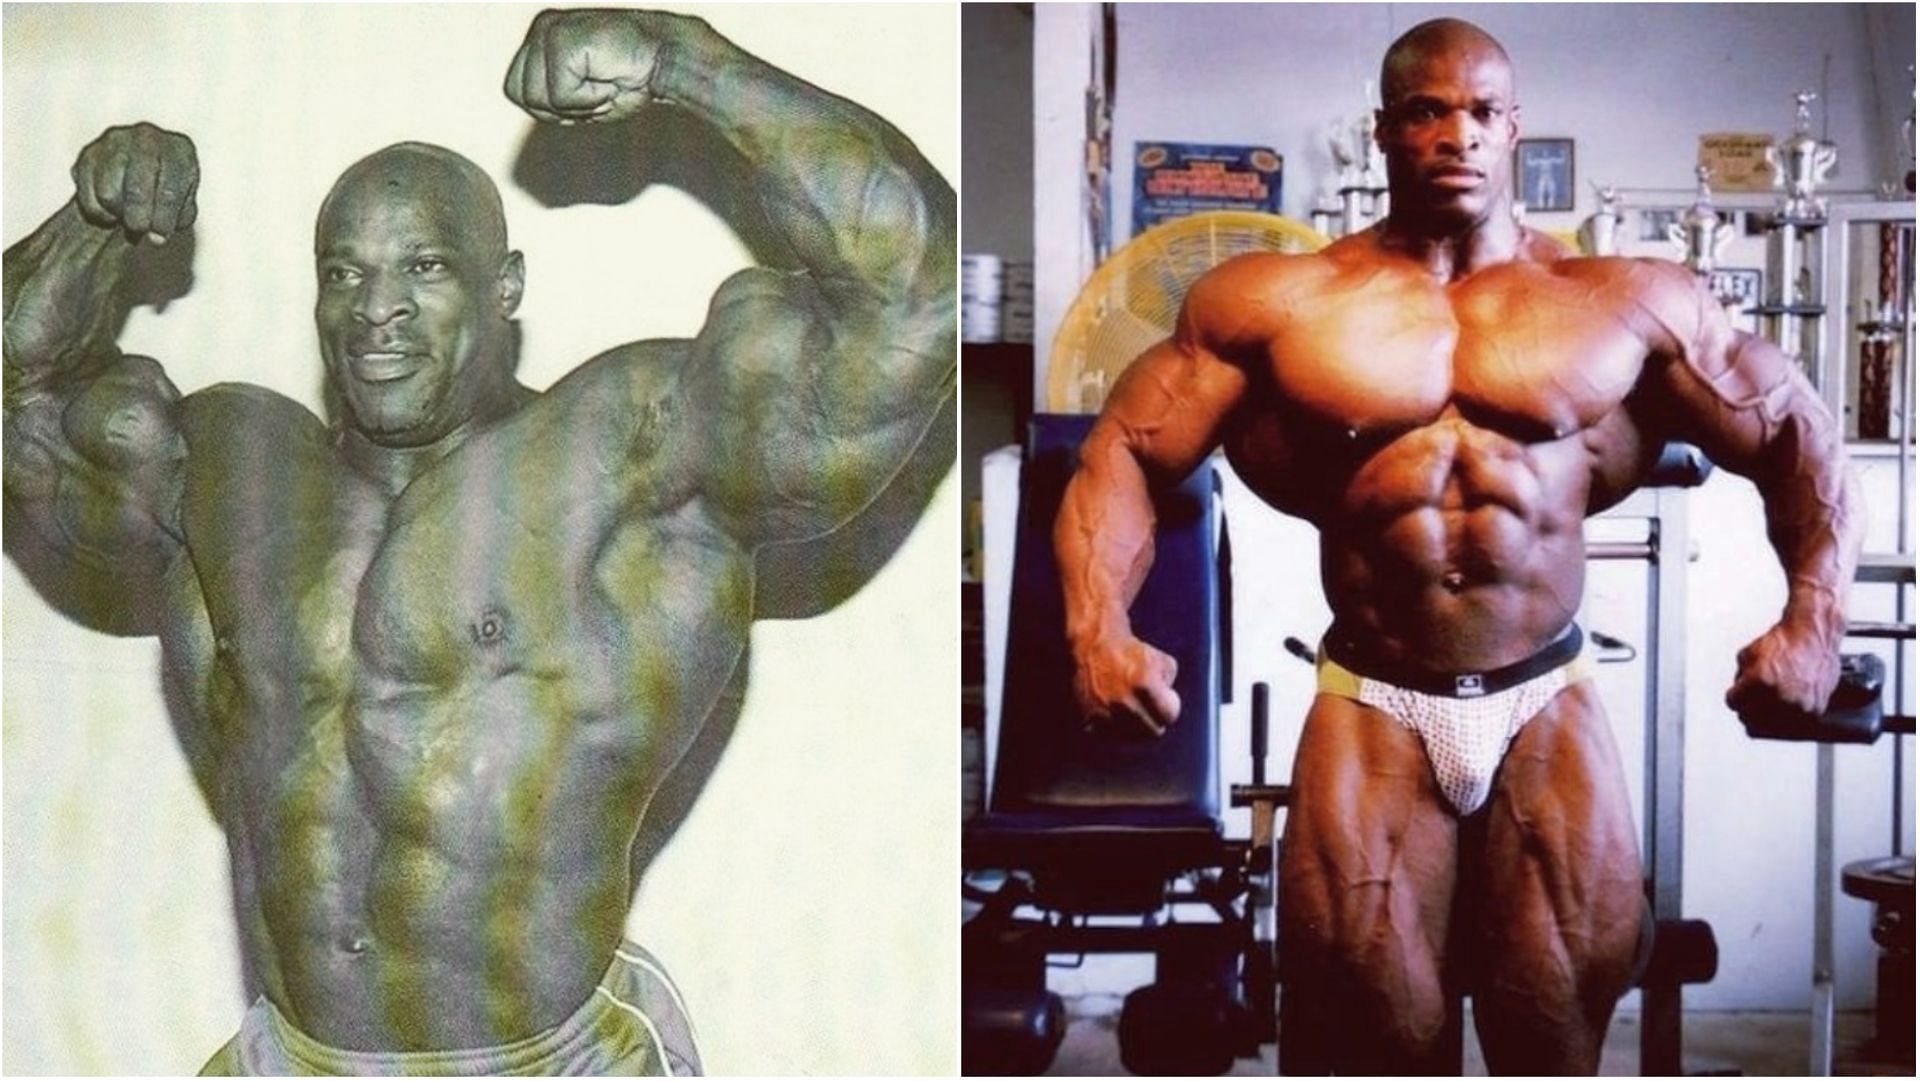 Ronnie Coleman aka The King - the legendary bodybuilder. (Photo via Instagram/ronniecoleman8 and thearchivesofbodybuilding)